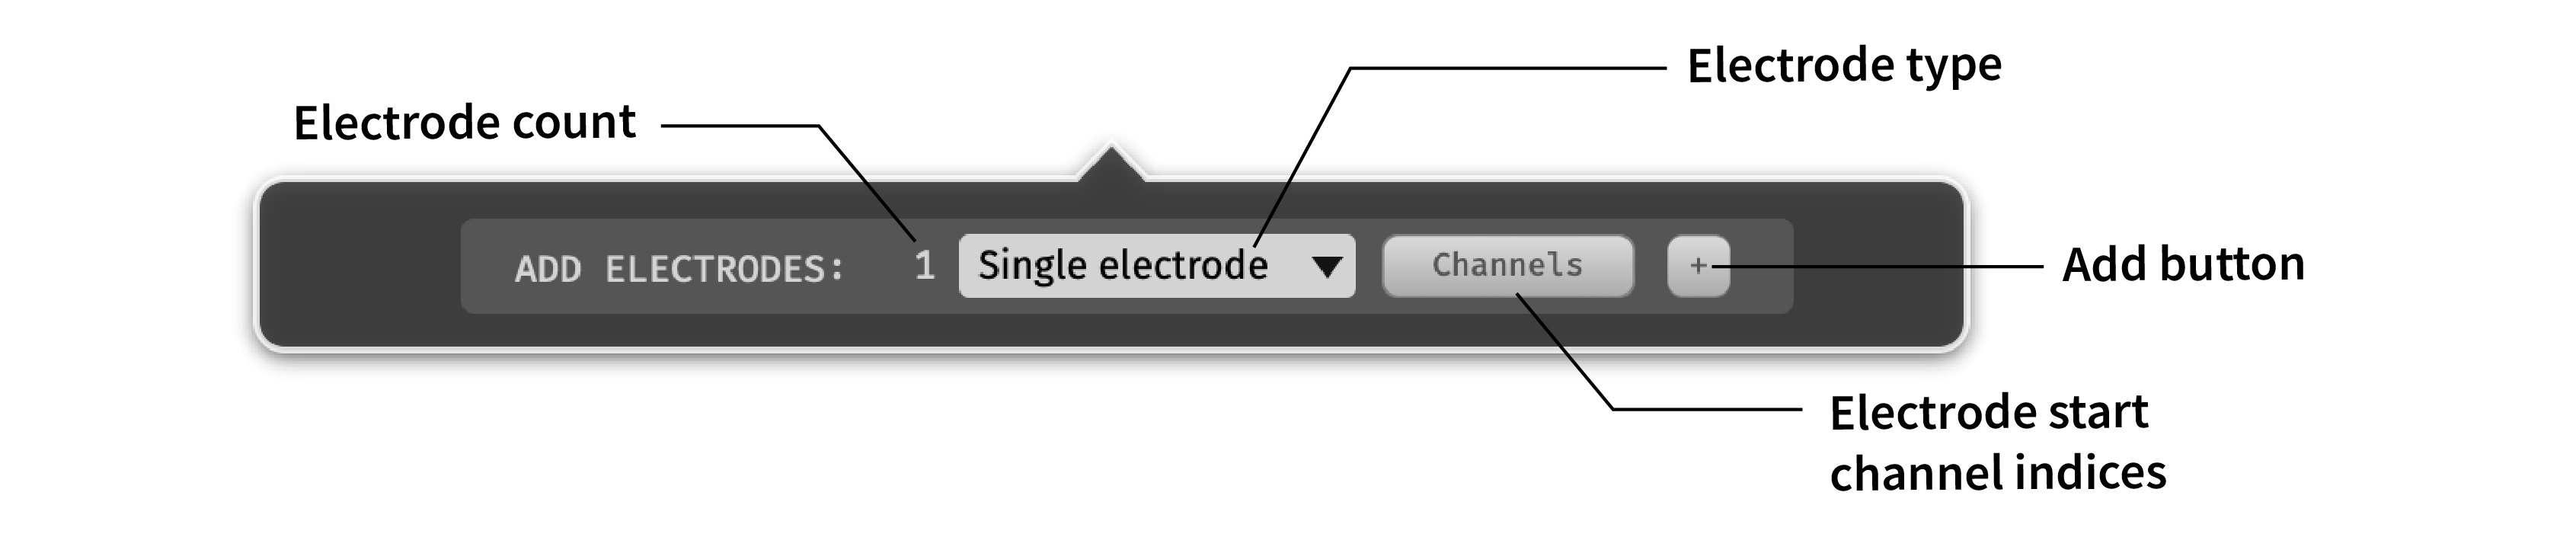 Annotated Spike Detector "add electrode" menu